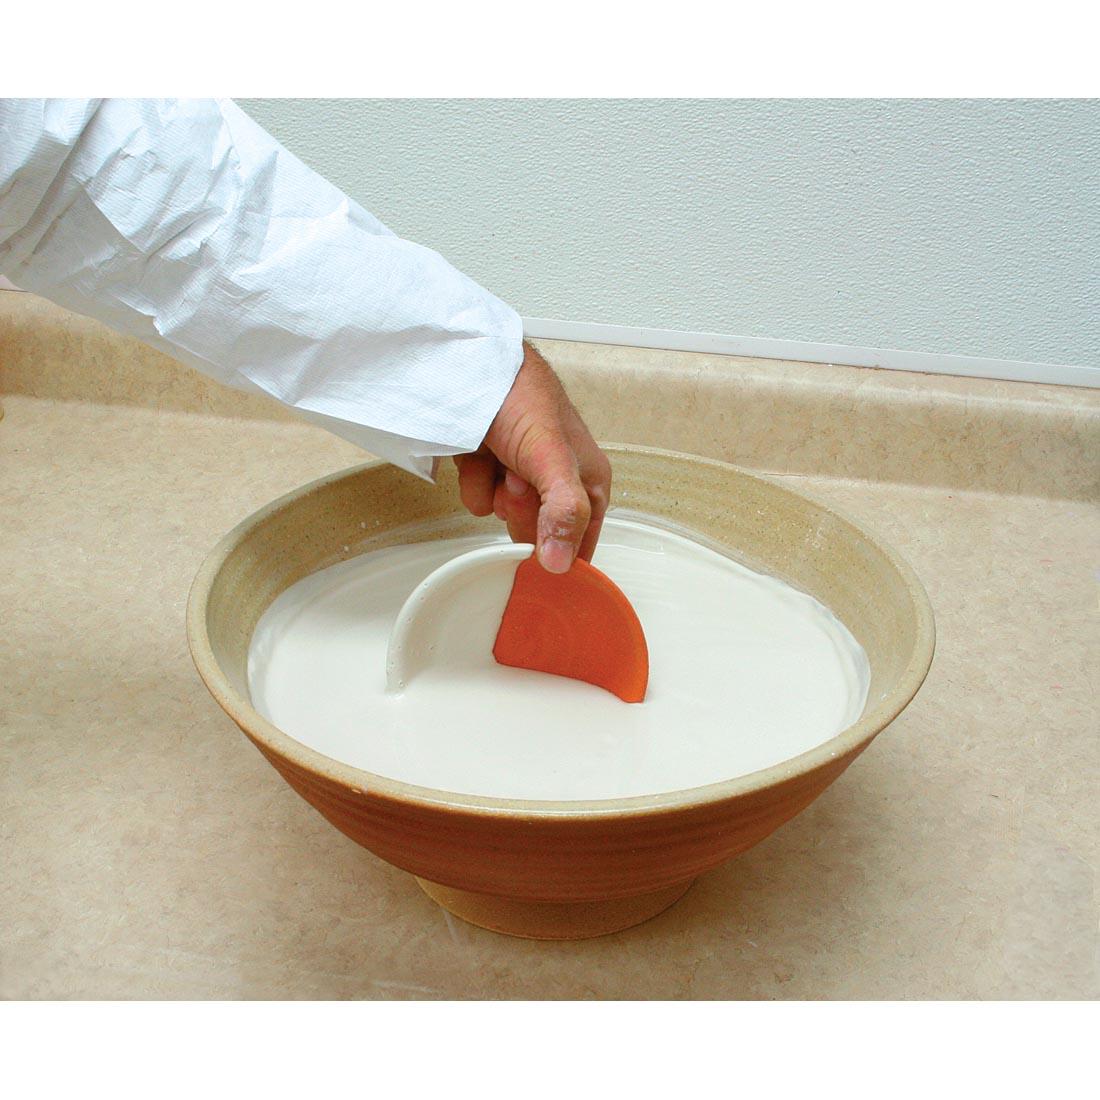 pottery being dipped into a bowl of AMACO Clear Low Fire Dipping Glaze